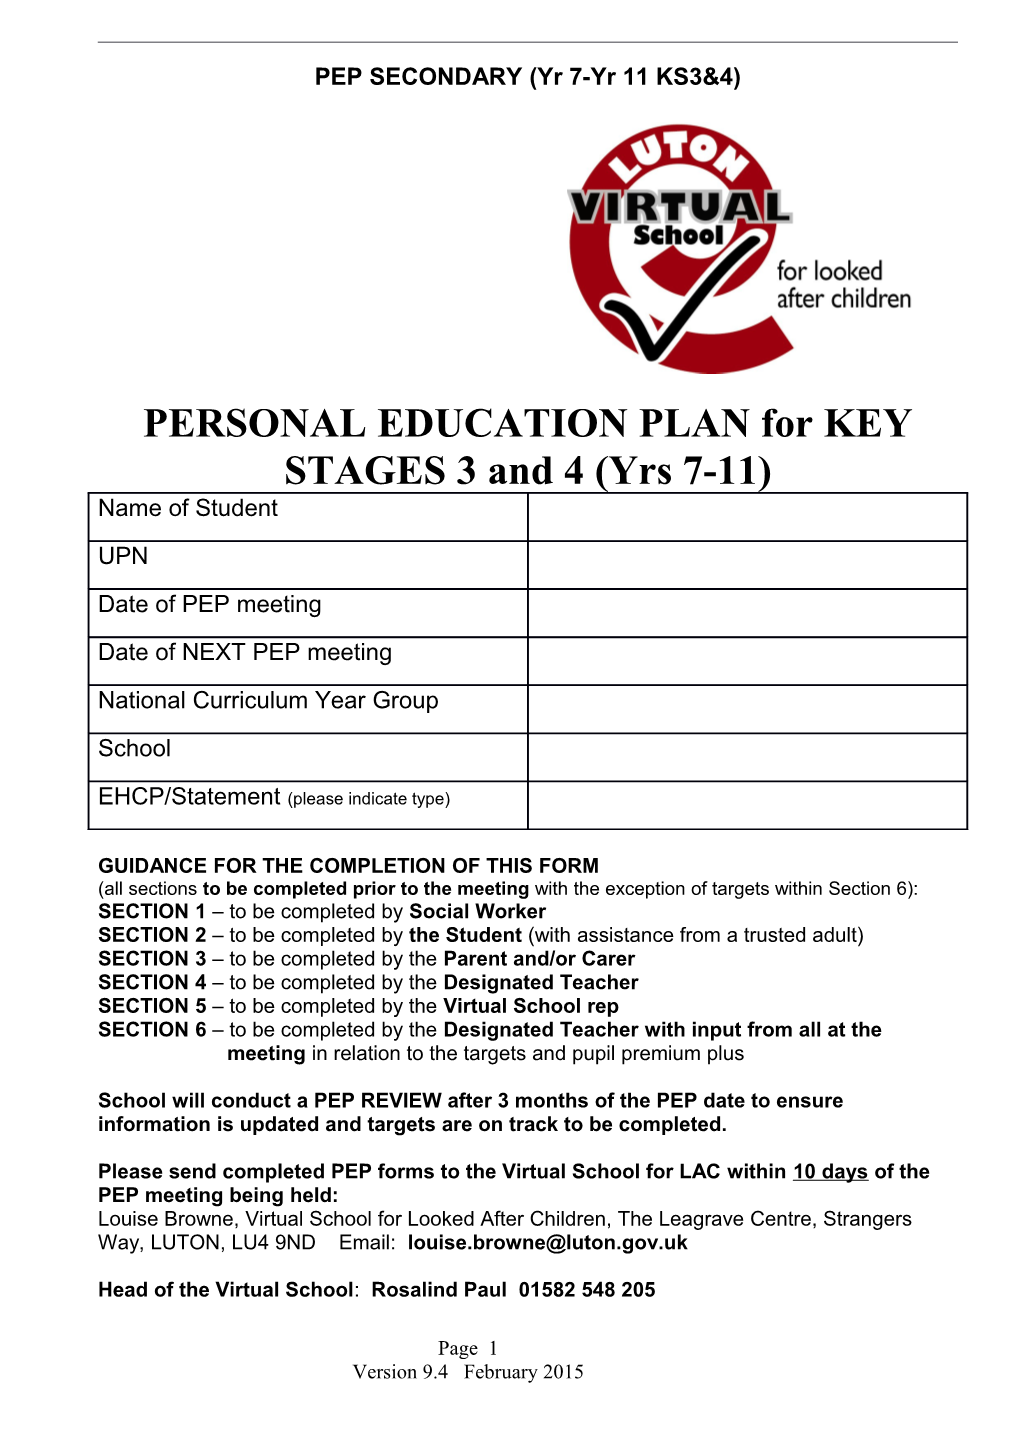 PERSONAL EDUCATION PLAN for KEY STAGES 3 and 4 (Yrs 7-11)